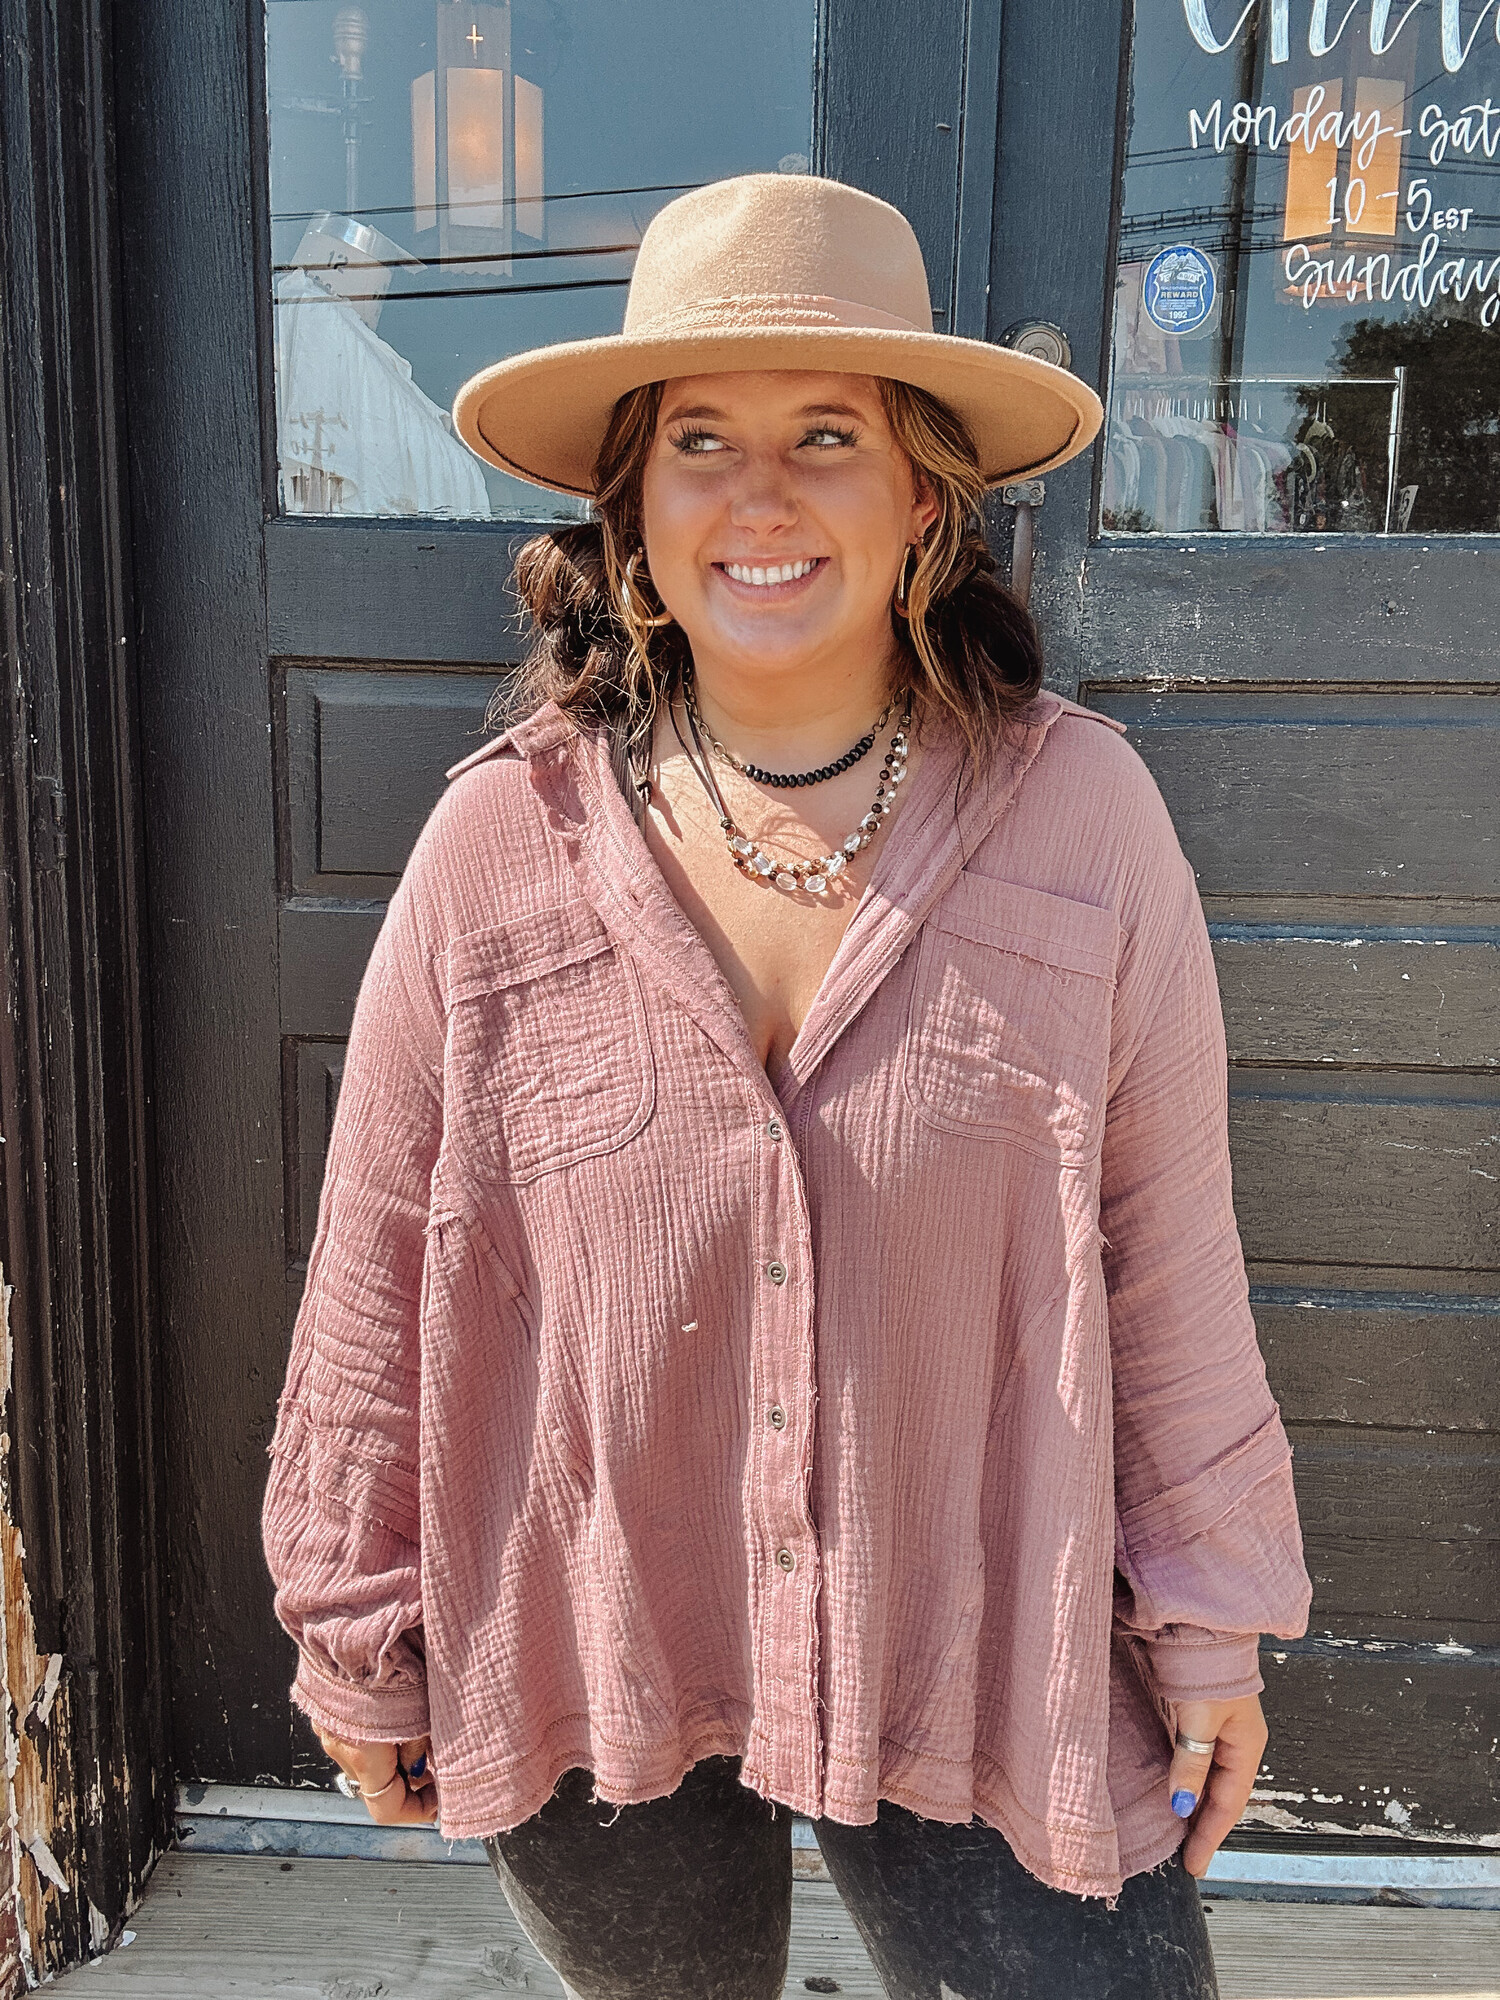 These gorgeous tops come in a lovely mauve color and are made of the very popular gauze material with frayed hems! This is a staple piece!
Madison is wearing a size Large.